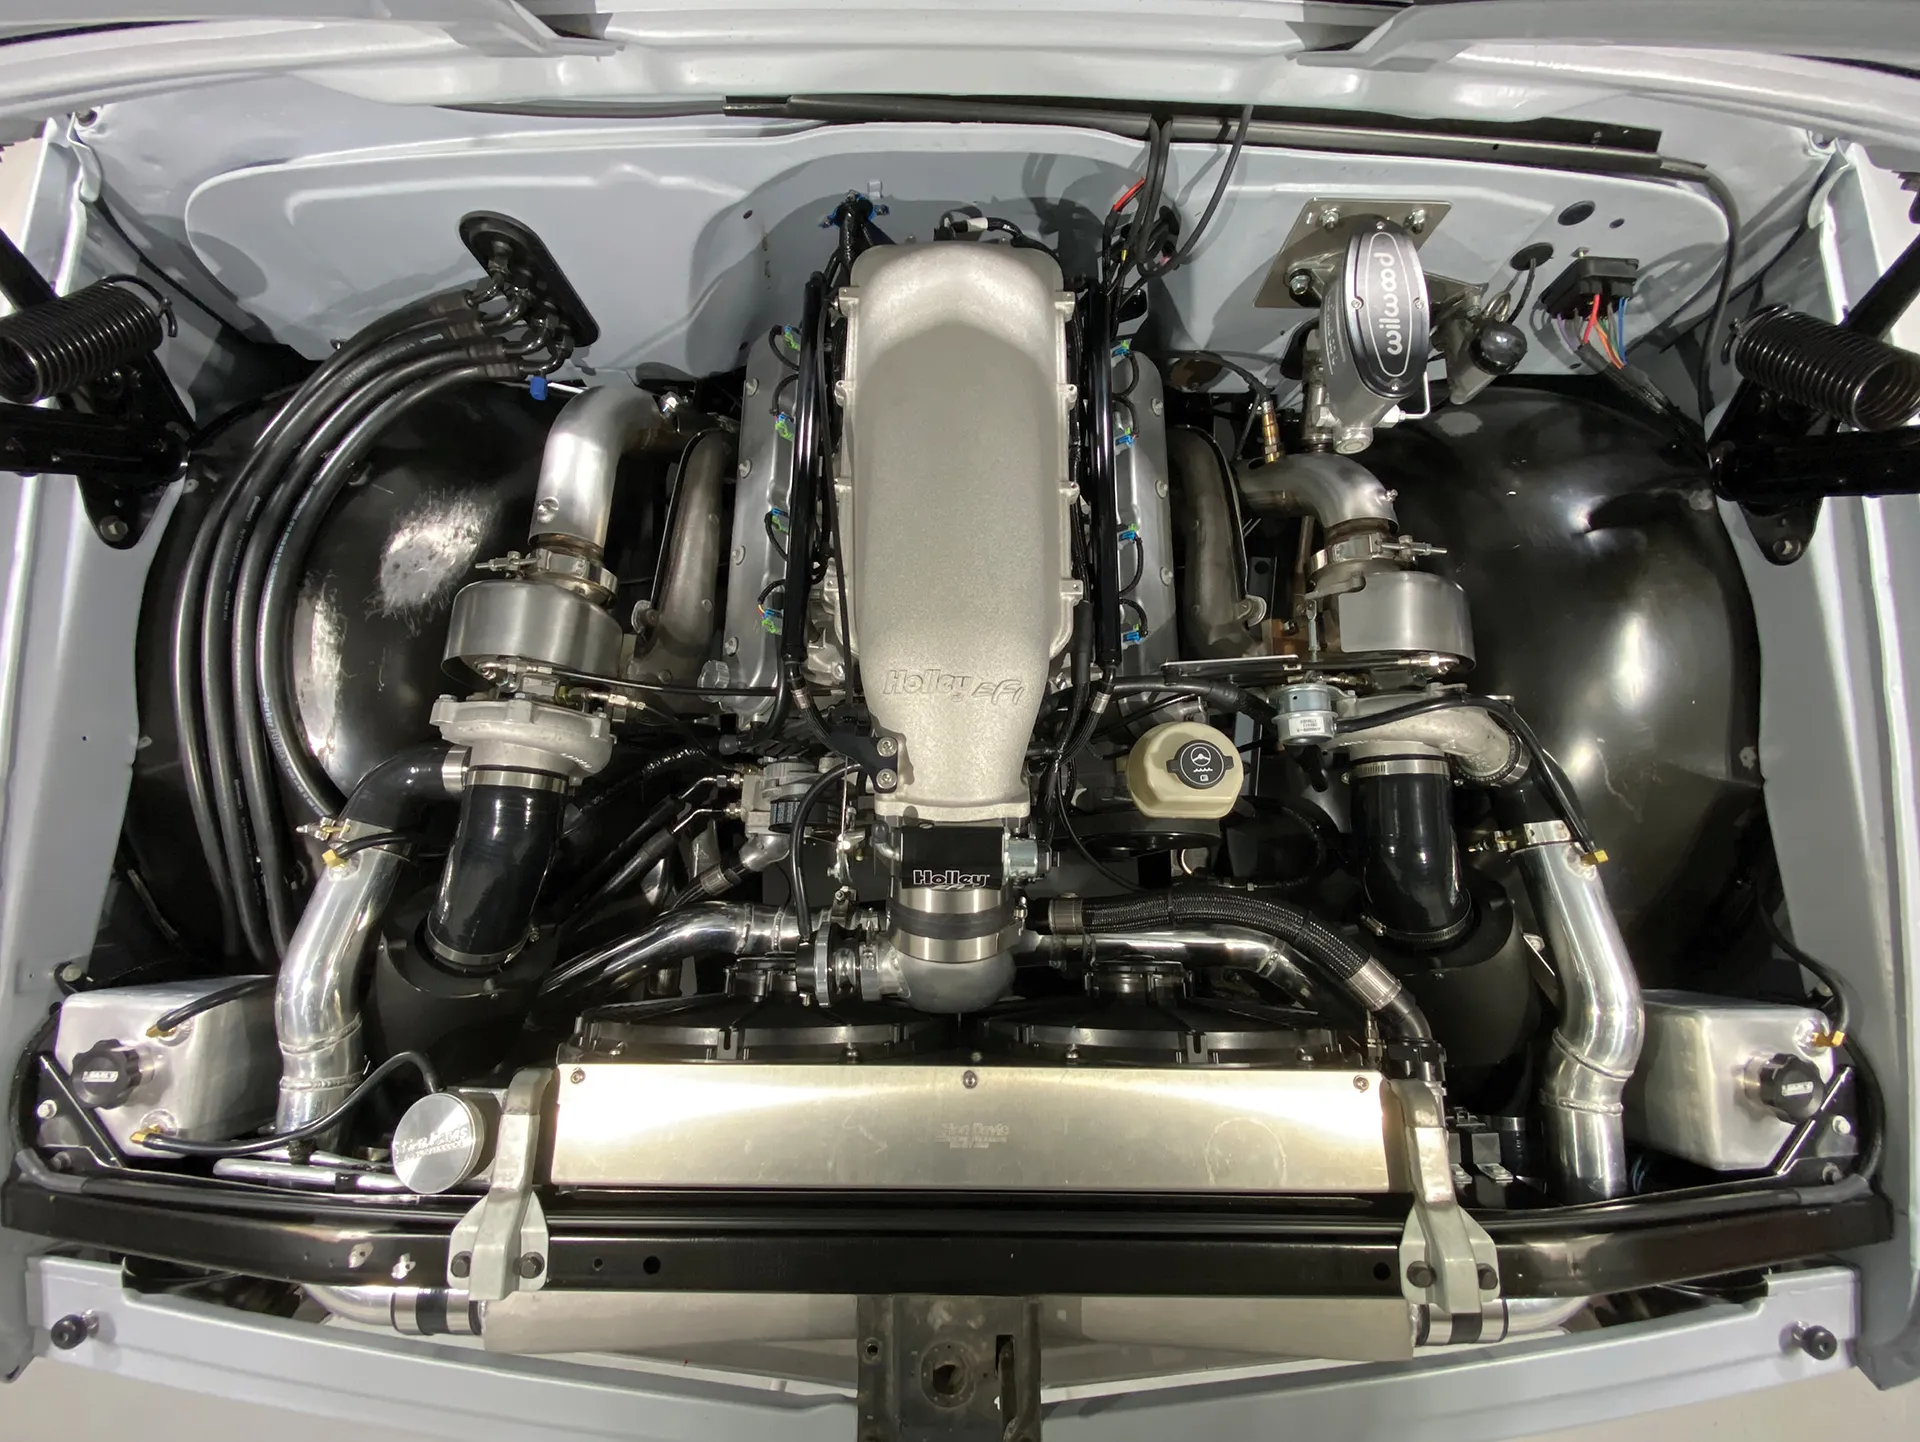 Top down view of twin-turbo LS in '68 Chevy truck